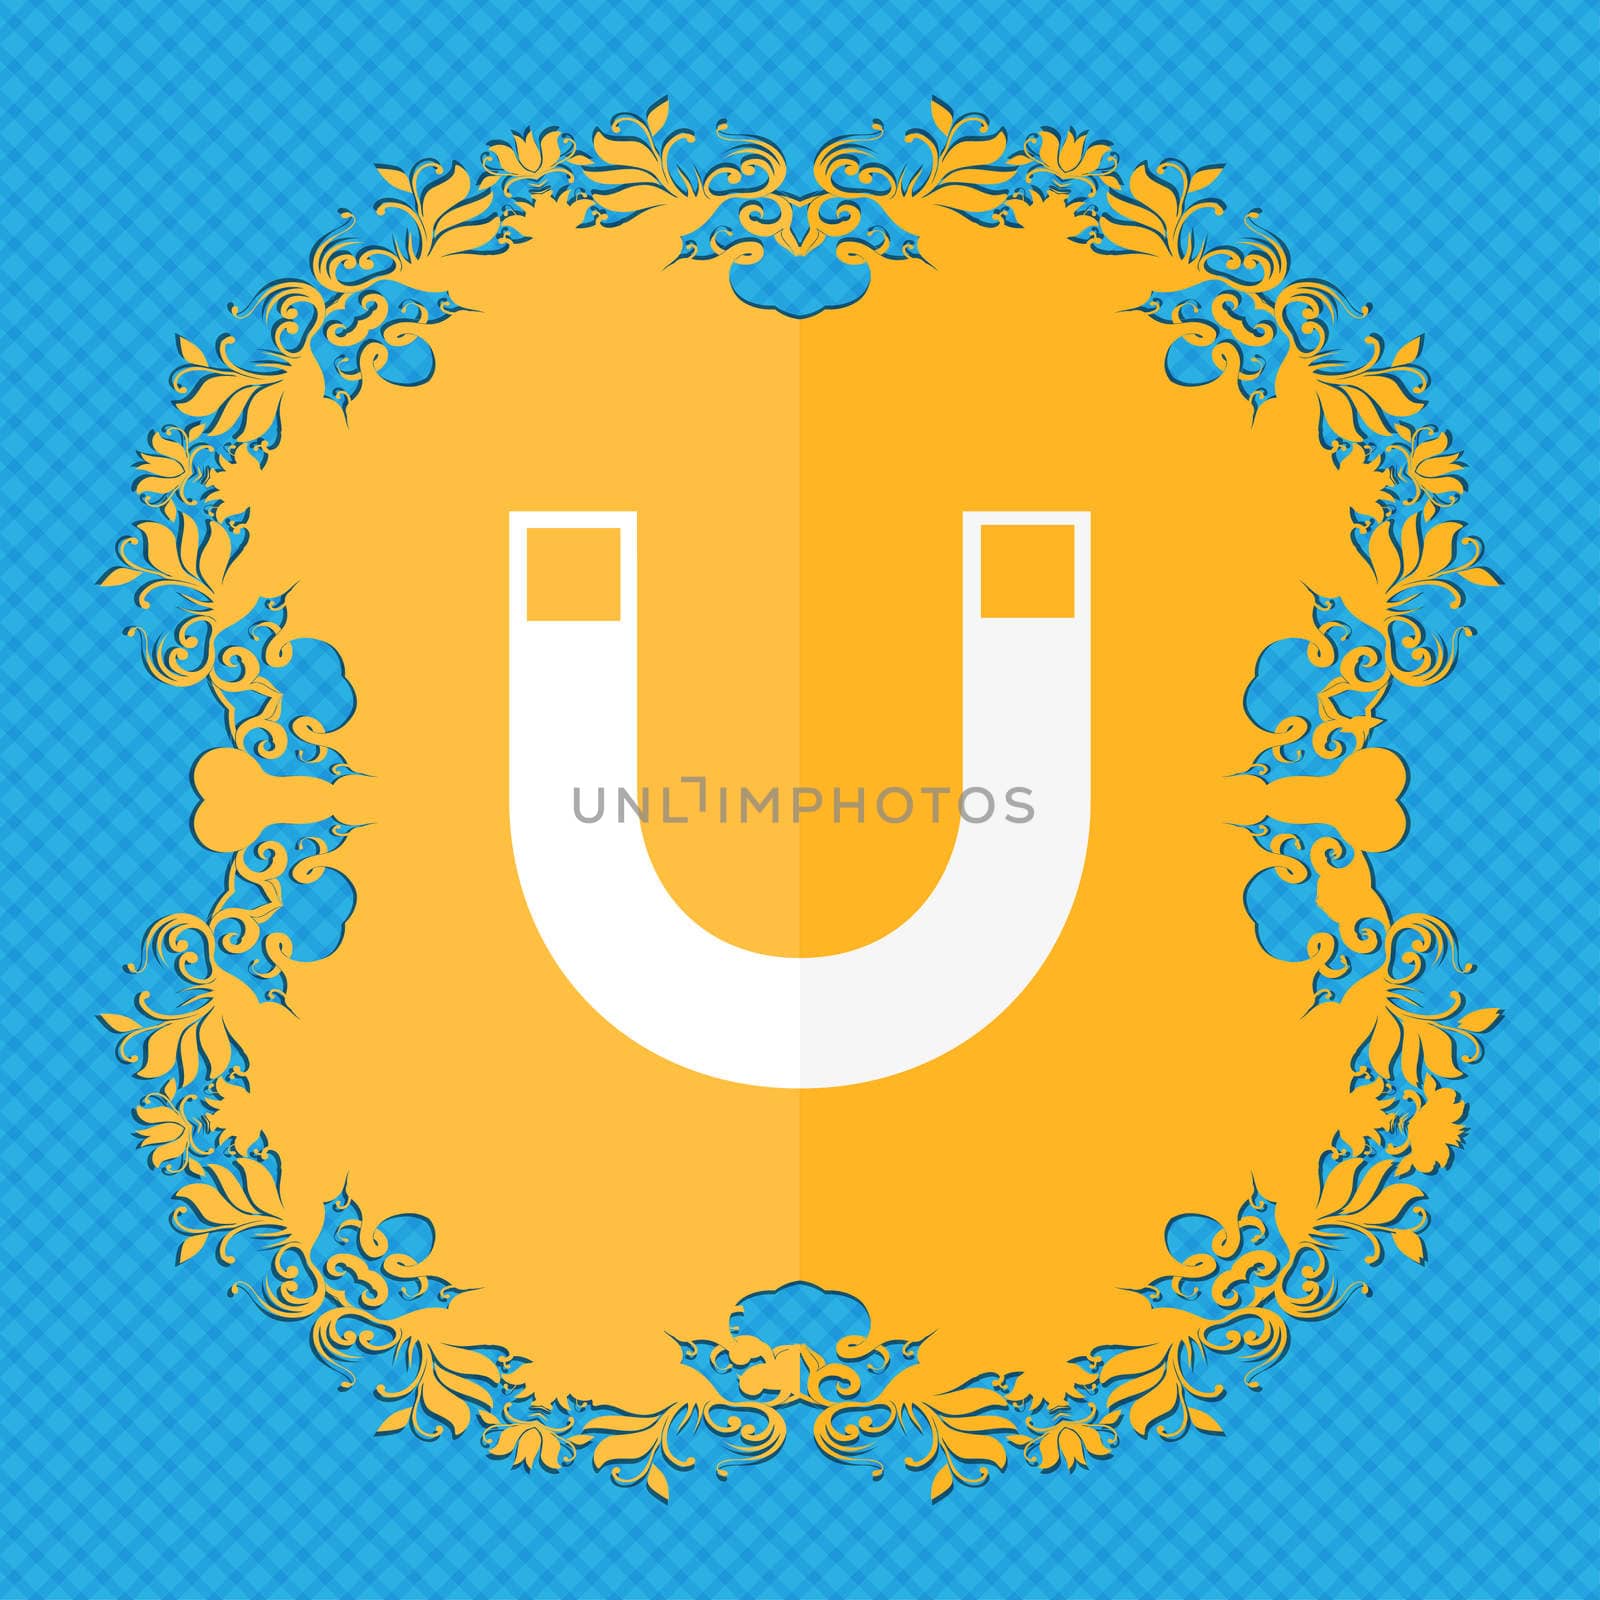 magnet sign icon. horseshoe it symbol. Repair sig. Floral flat design on a blue abstract background with place for your text. illustration